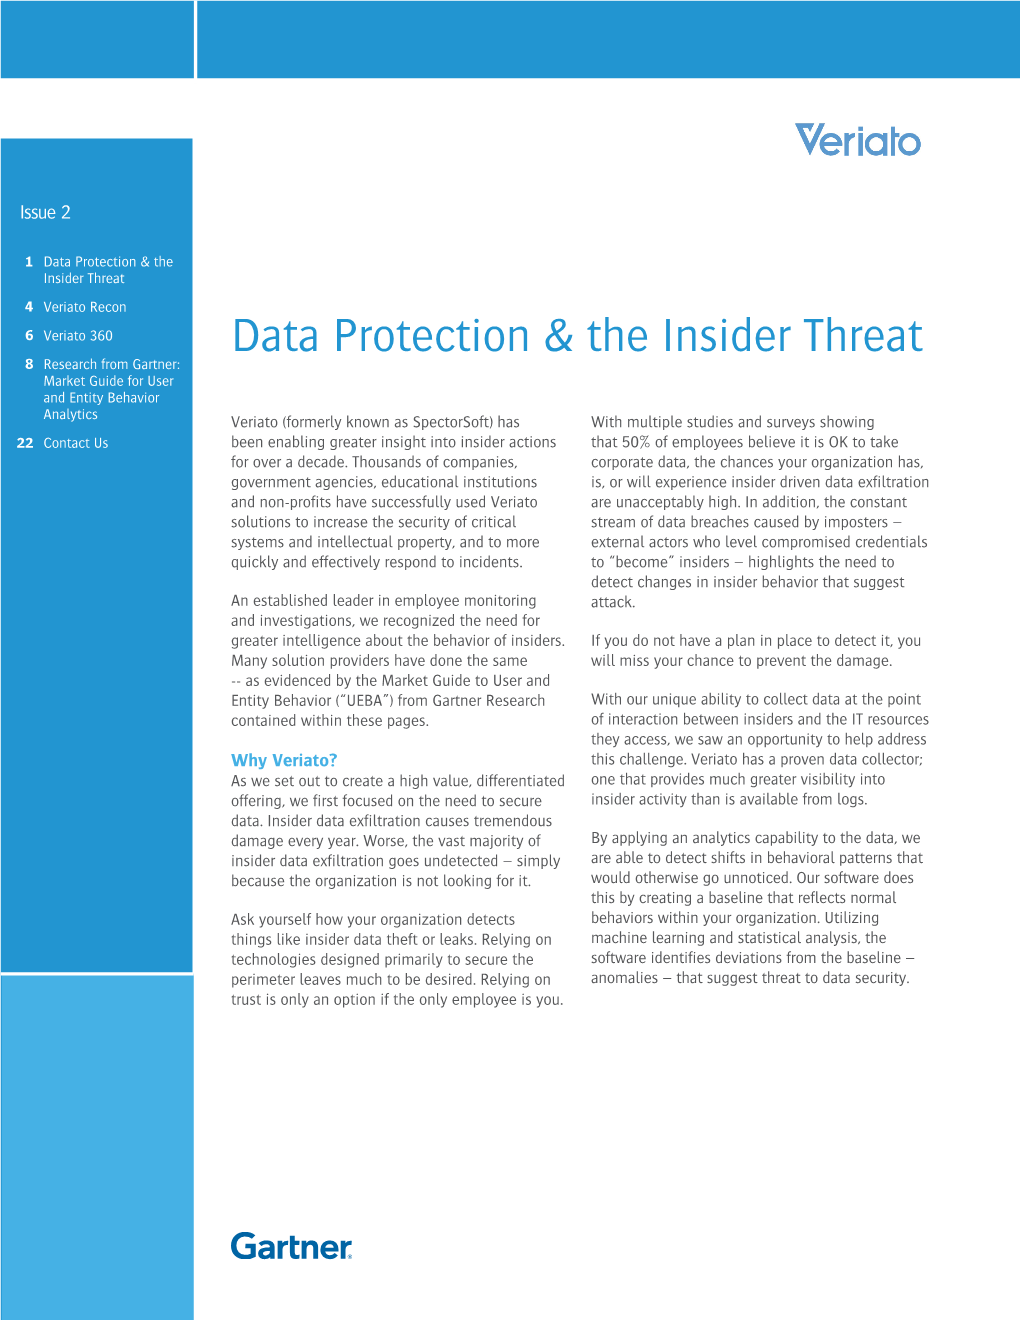 Data Protection & the Insider Threat